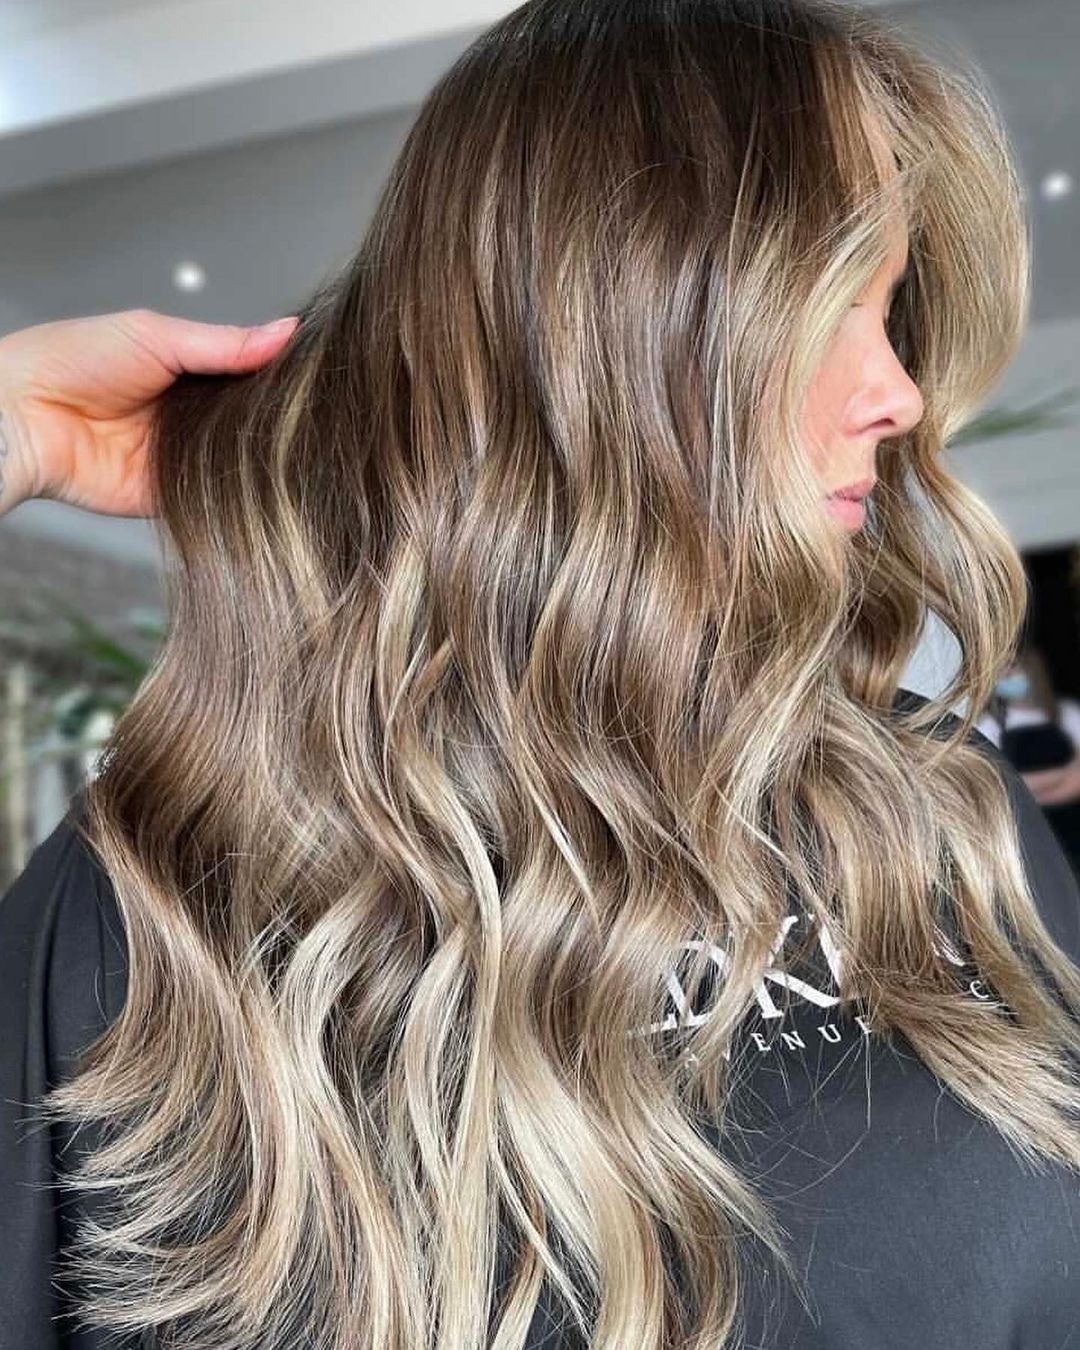 50 Awesome Long Layered Hair Ideas For 2021 images 26